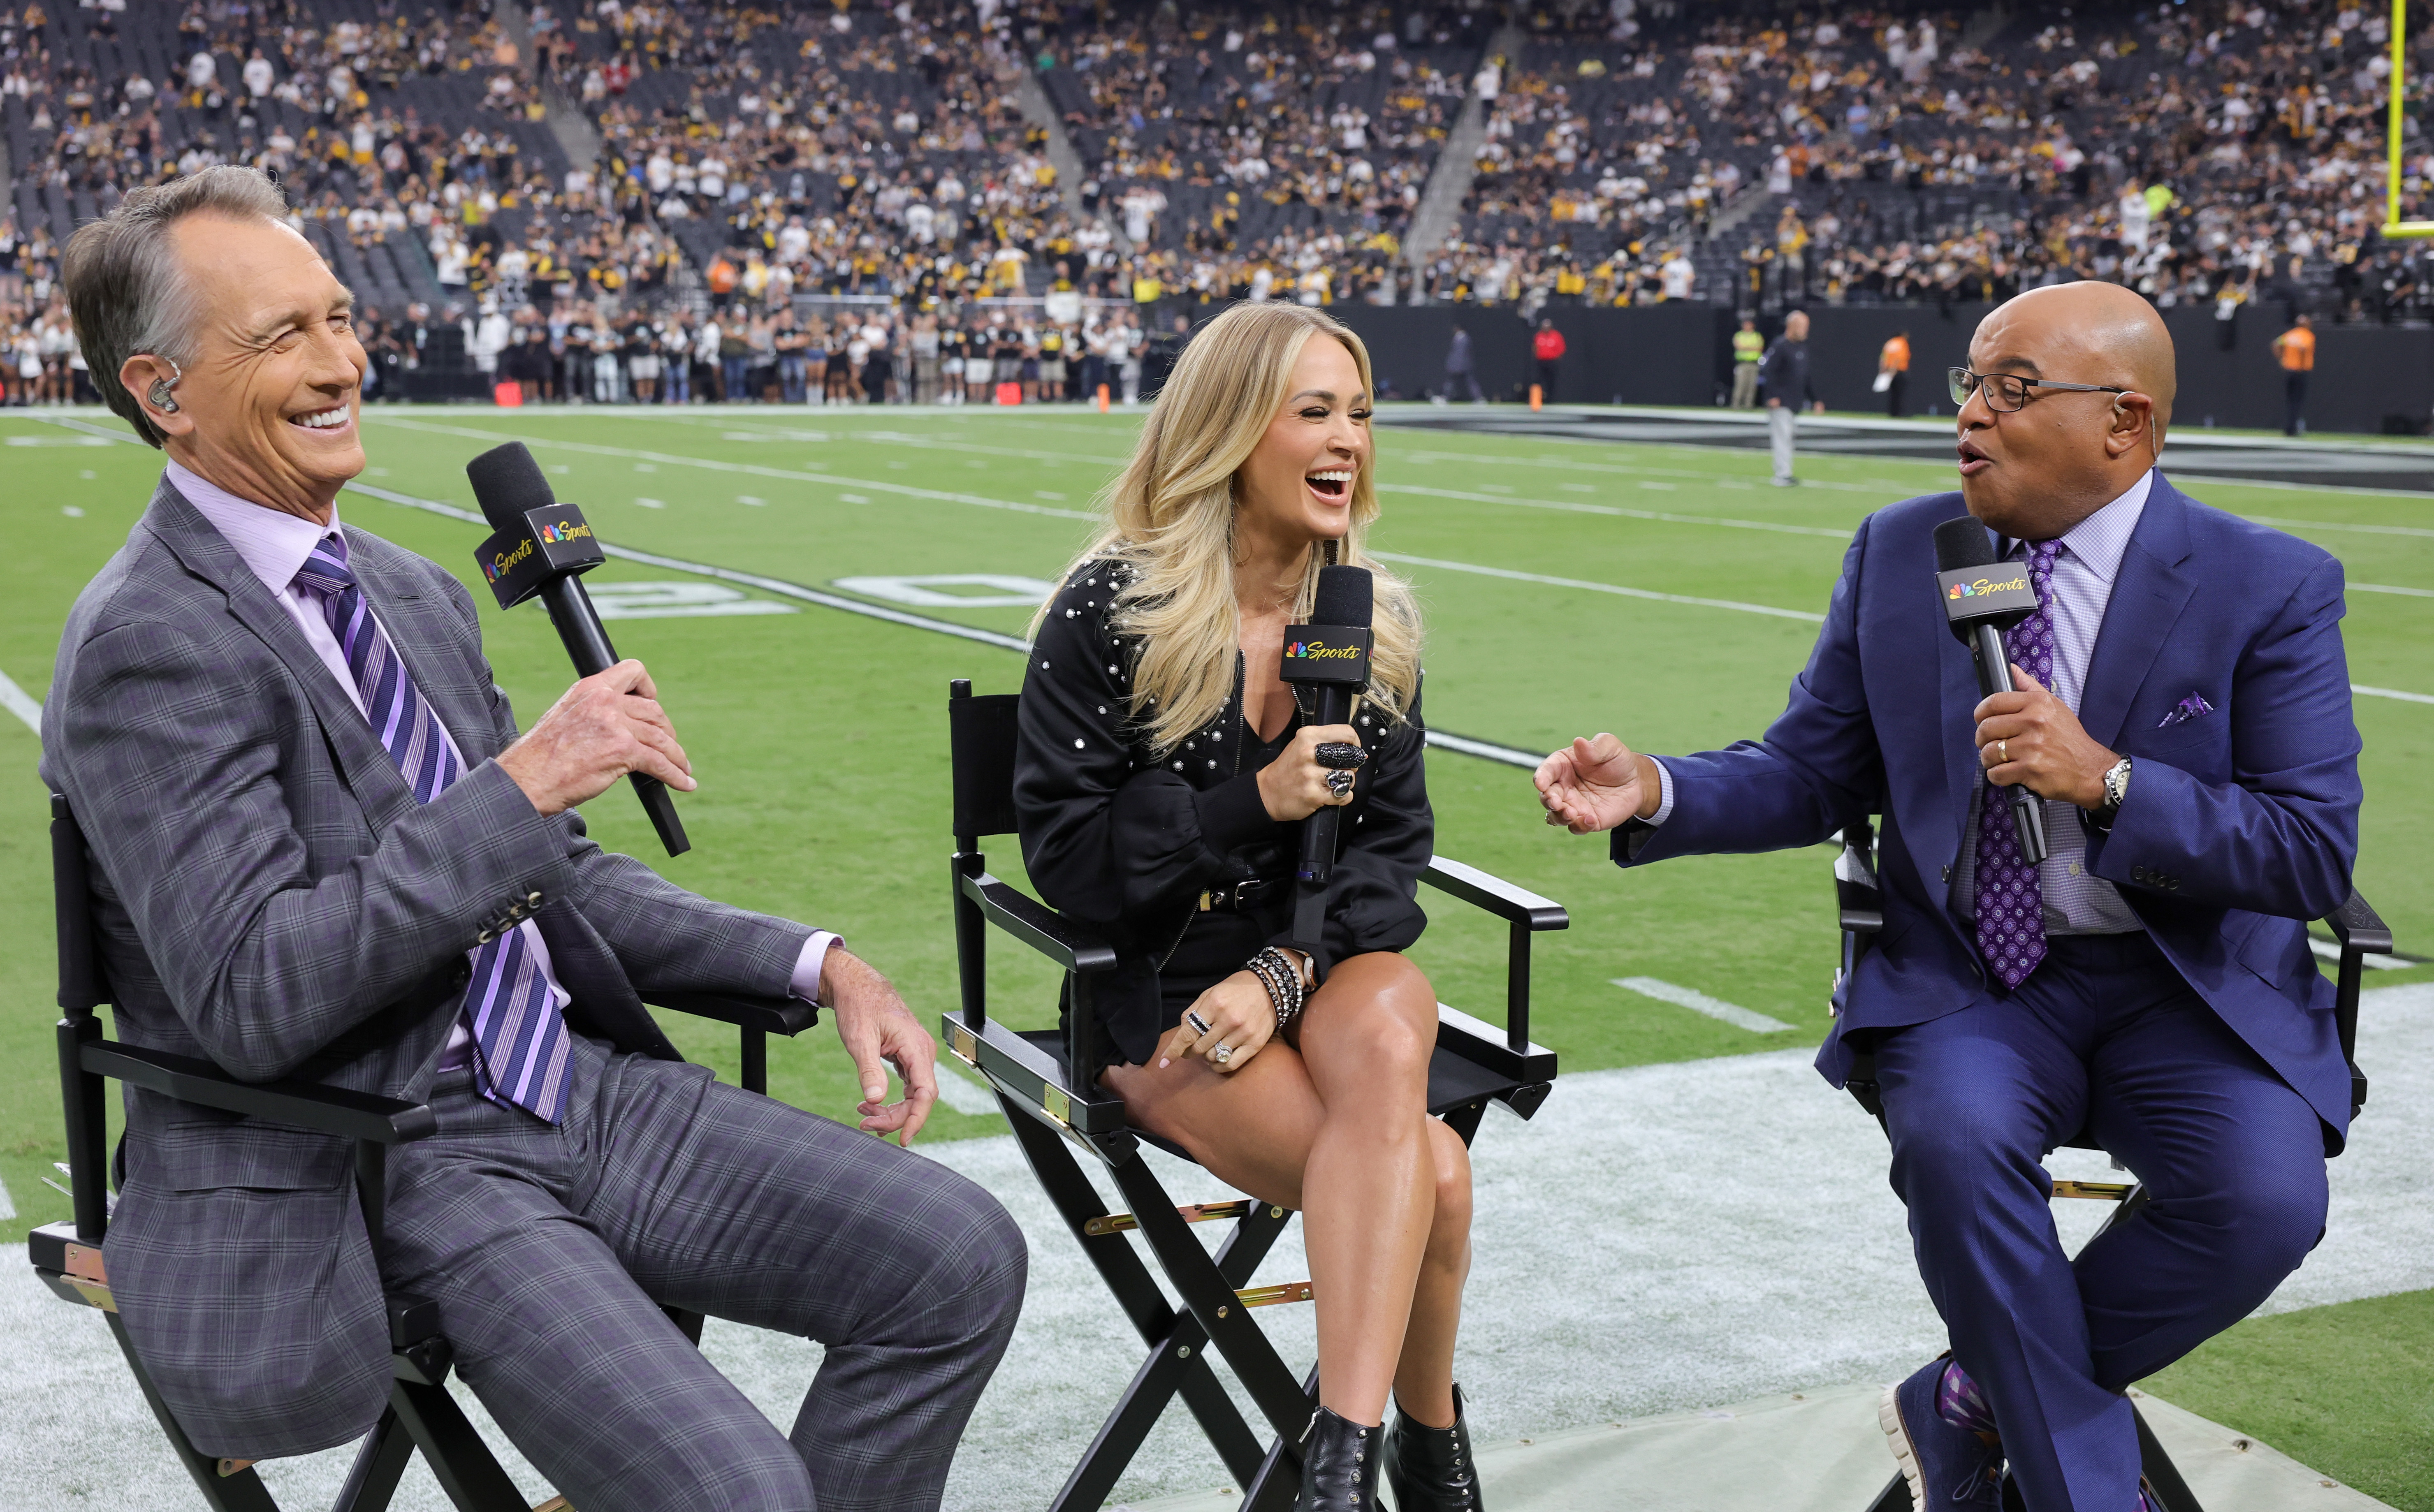 LAS VEGAS, NEVADA - SEPTEMBER 24: (L-R) NBC Sunday Night Football color commentator Cris Collinsworth, recording artist Carrie Underwood and NBC Sunday Night Football play-by-play announcer Mike Tirico talk before a game between the Pittsburgh Steelers and the Las Vegas Raiders at Allegiant Stadium on September 24, 2023 in Las Vegas, Nevada. The Steelers defeated the Raiders 23-18.